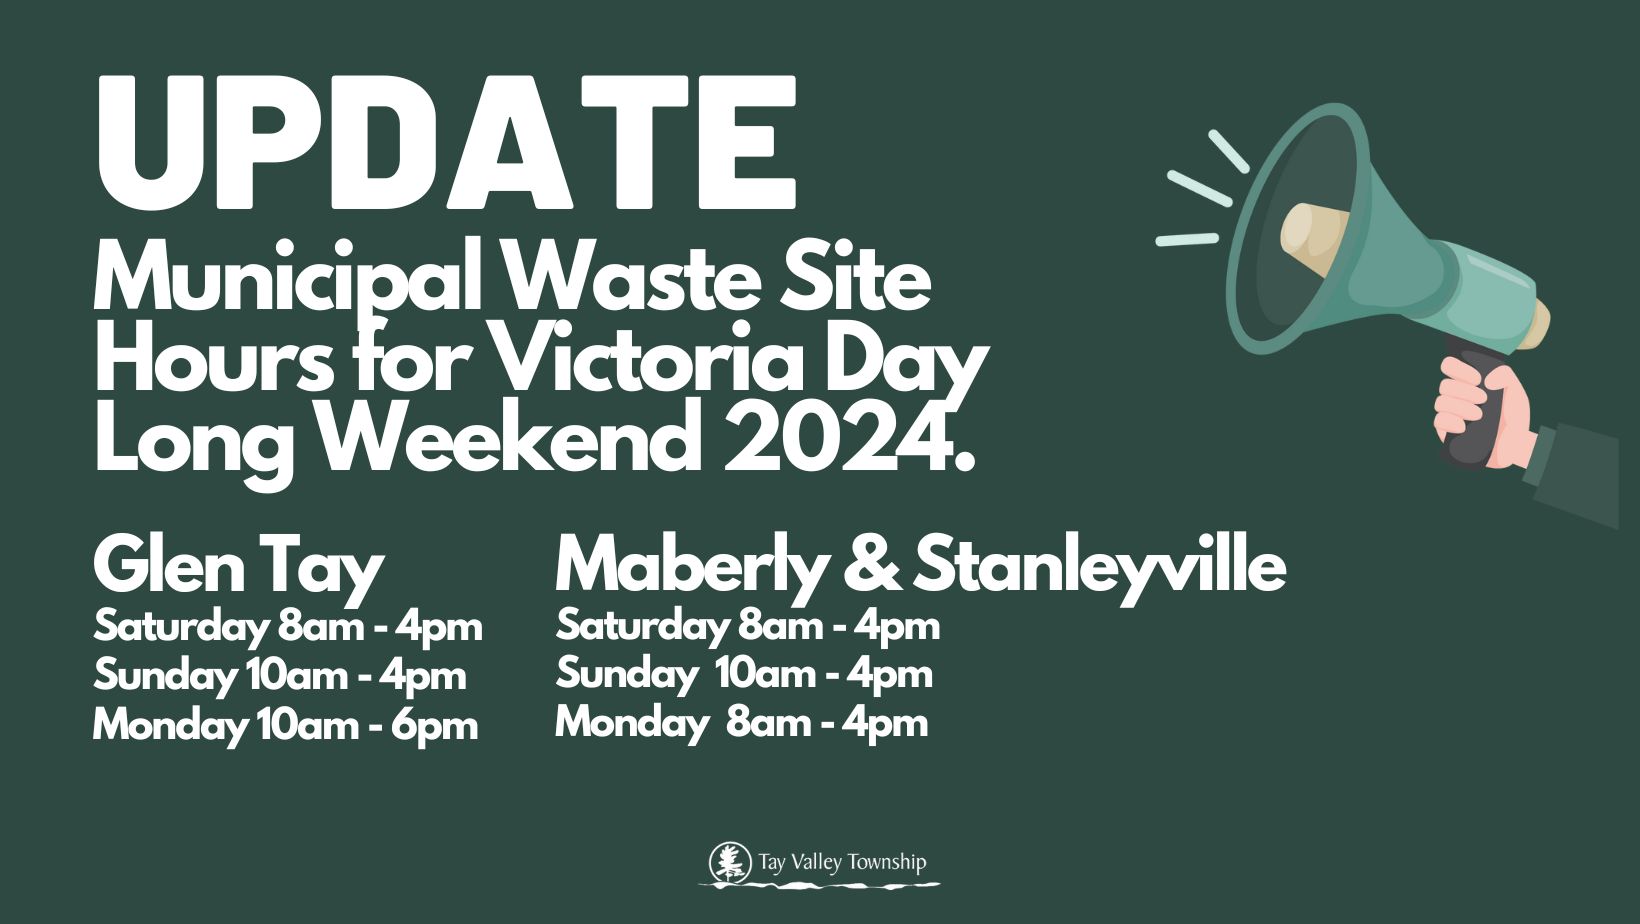 Update Poster for Waste Sites Victoria Day Long Weekend 2024